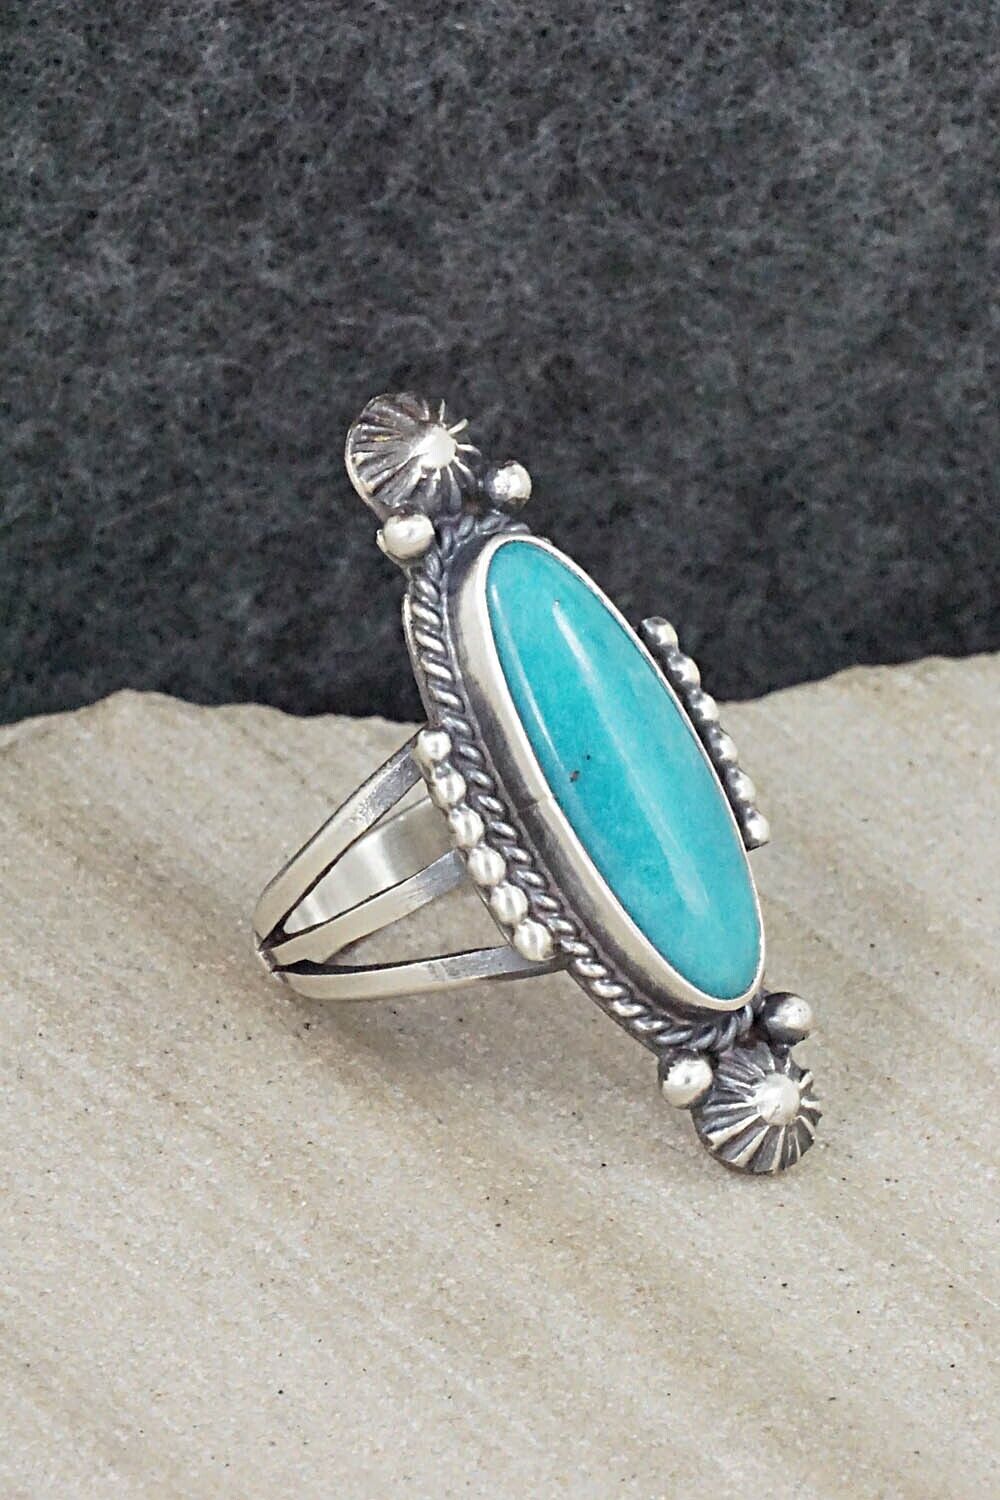 Turquoise & Sterling Silver Ring - Samuel Yellowhair - Size 5.75